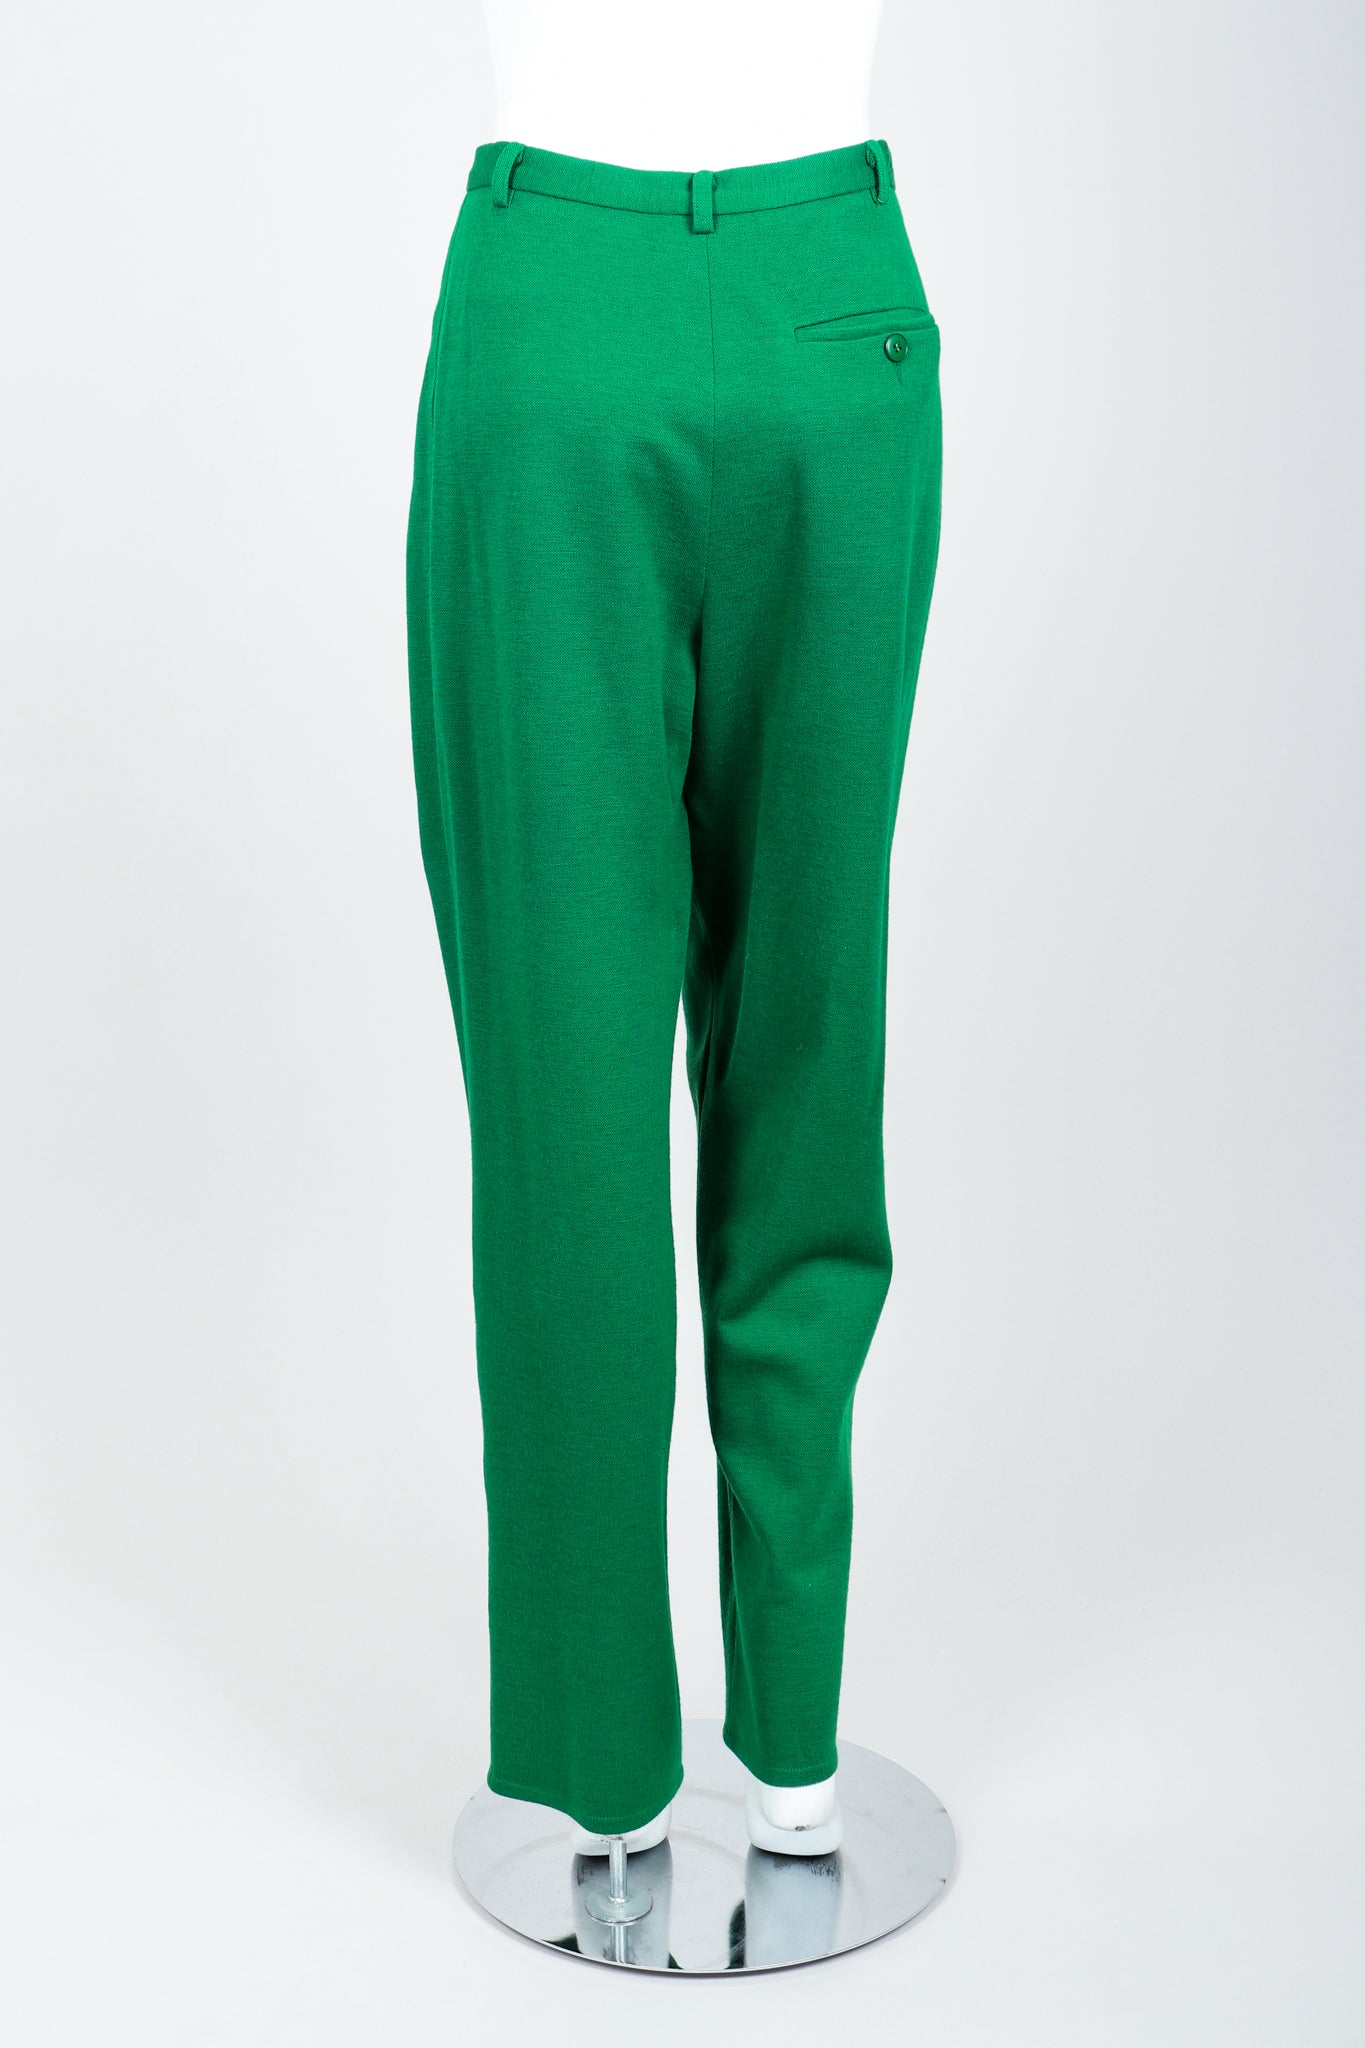 Vintage Sonia Rykiel Green Collegiate Knit Pant Set on Mannequin Back at Recess